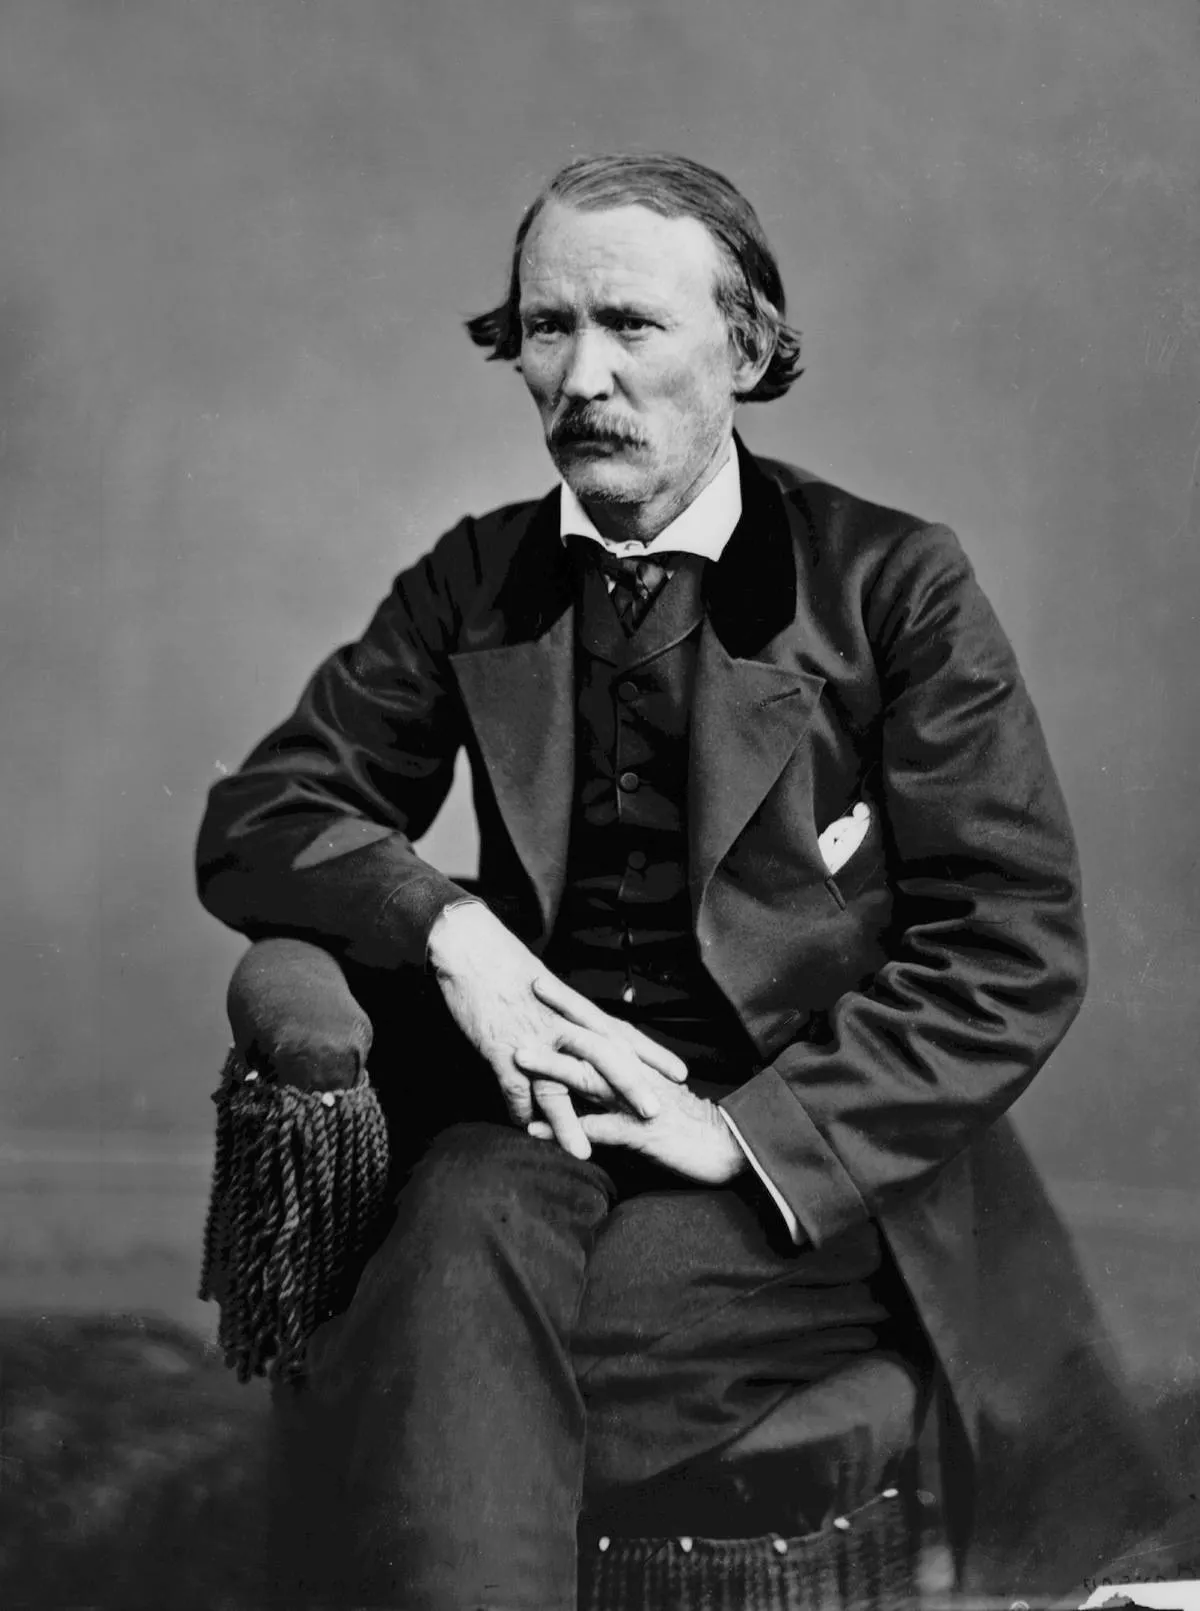 Christopher Houston said Kit Carson (1809-1868) legend of american west, he was trapper, indian agent